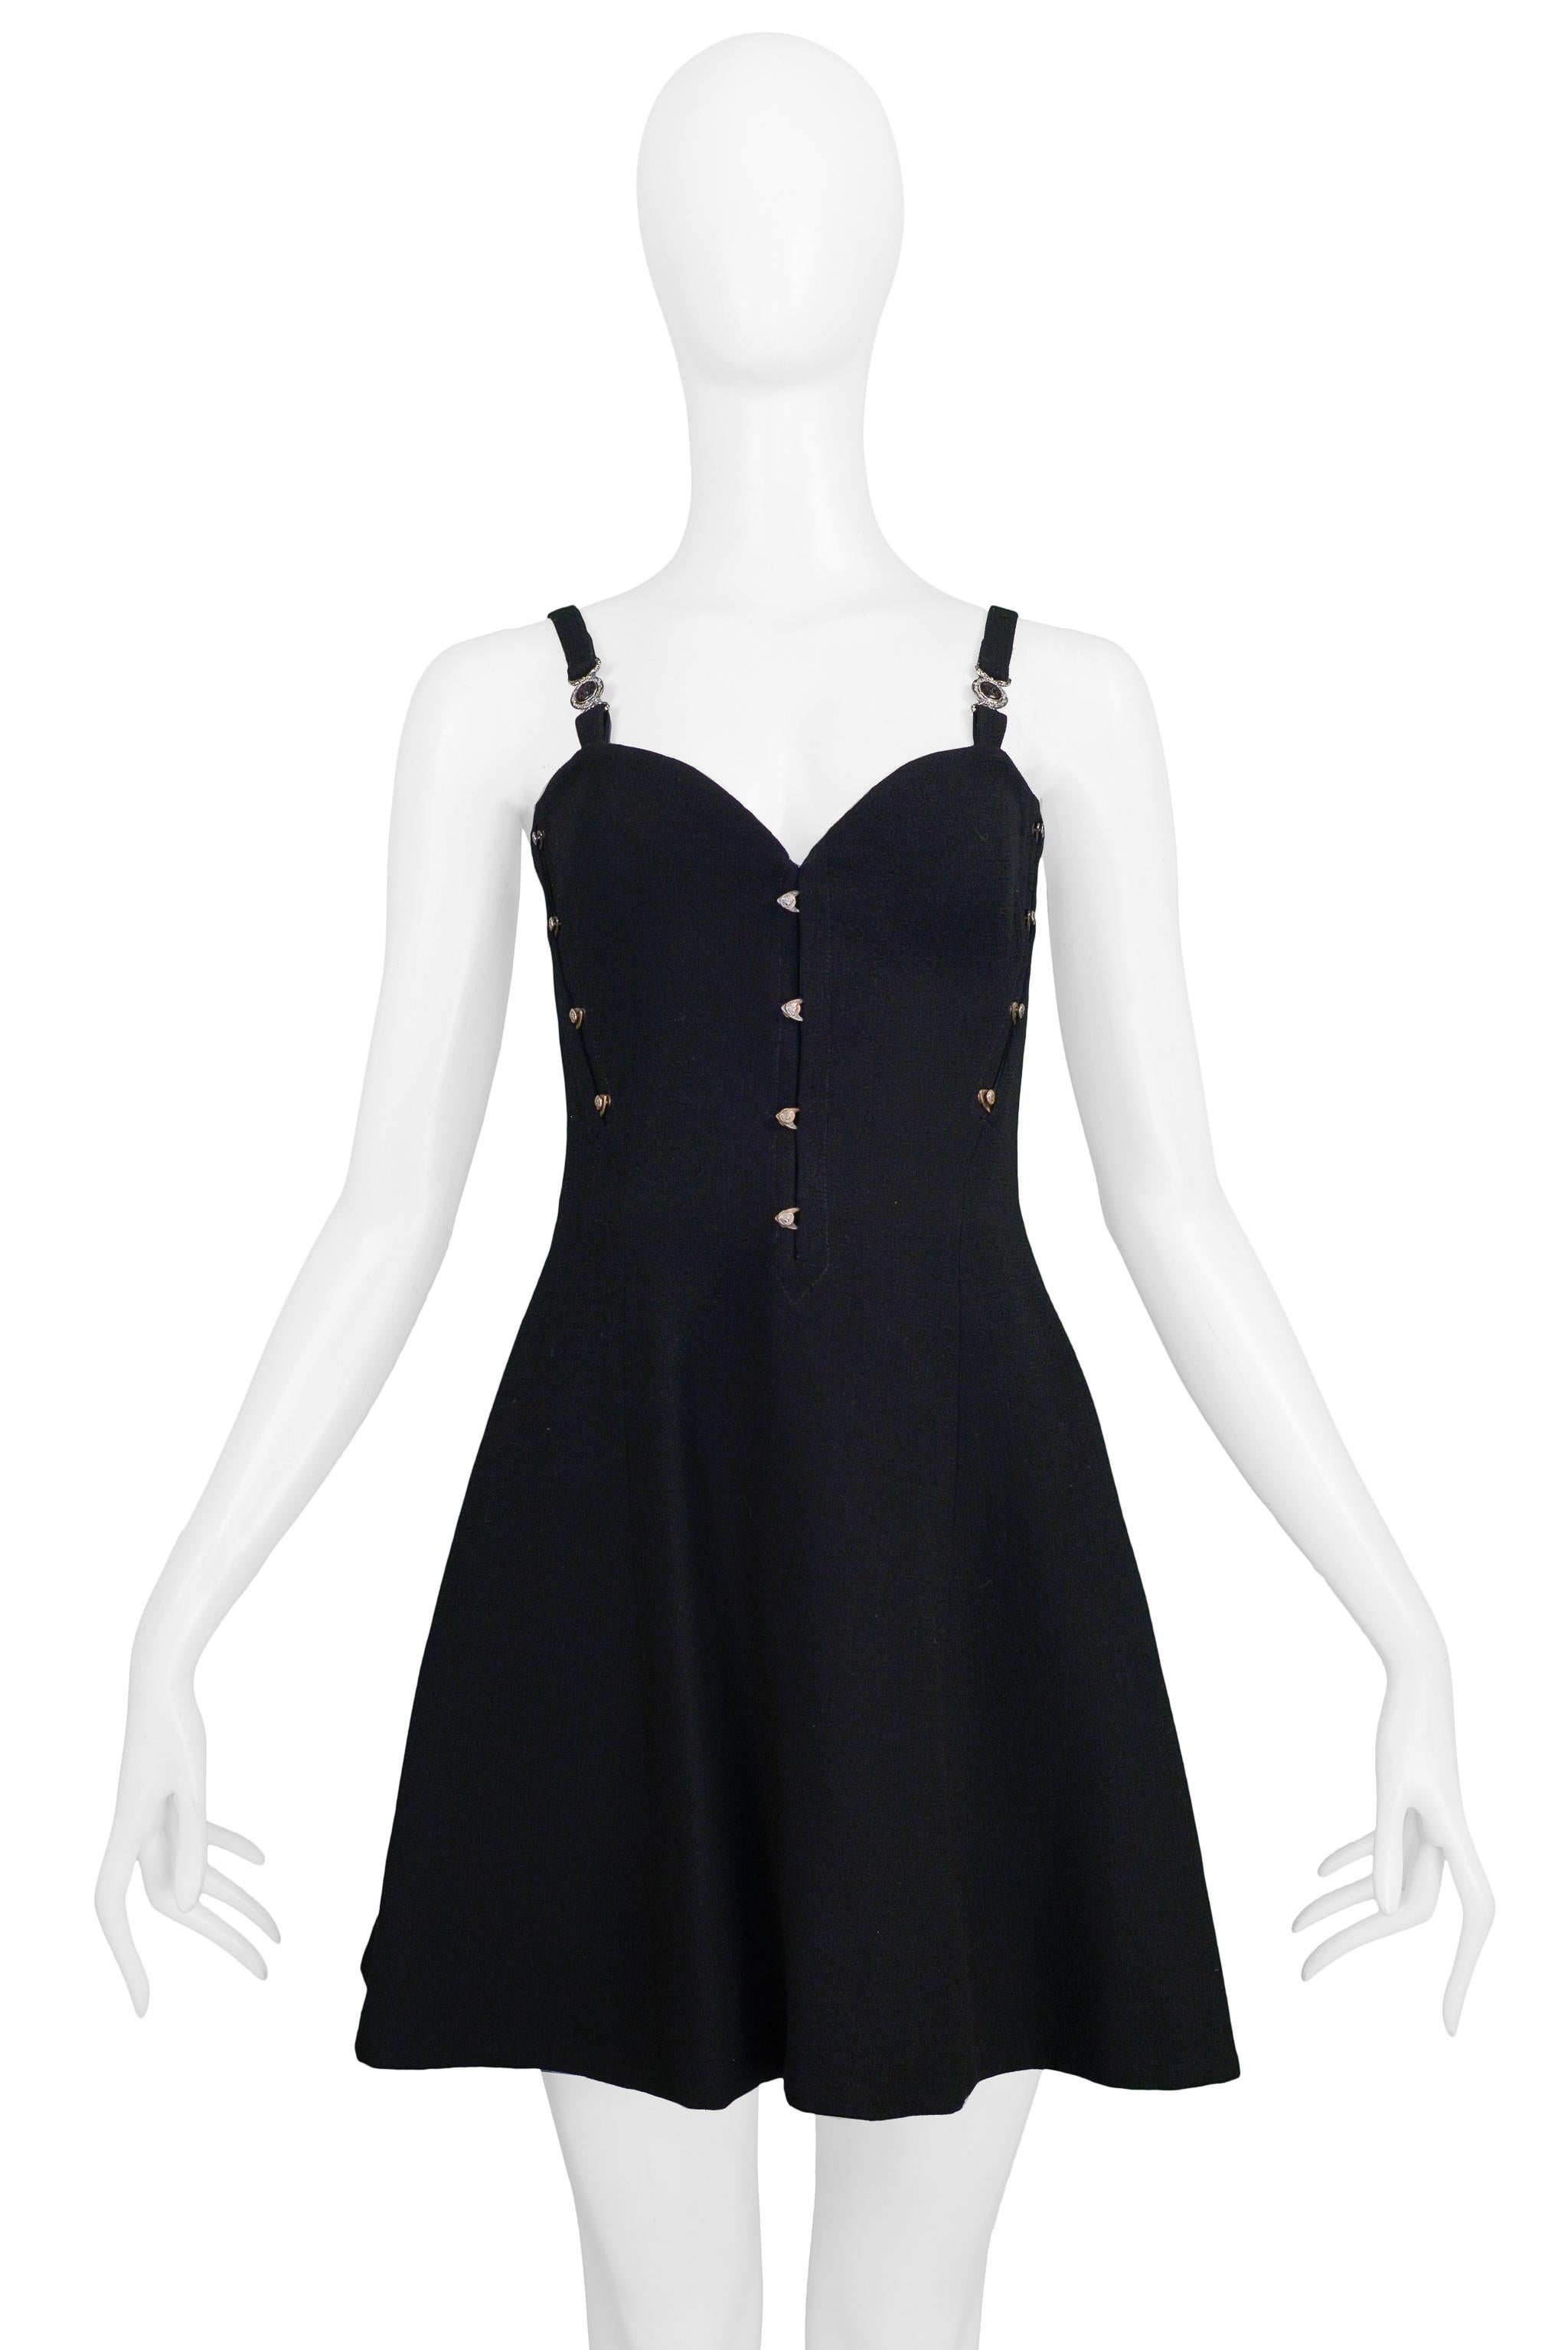 Resurrection Vintage is excited to offer a vintage Versace black bustier mini dress featuring a fitted bodice with goldtone metal tabs, Medusa medallions on the straps, and skater style skirt. 

Versace 
Measurements: Approx Bust: 32